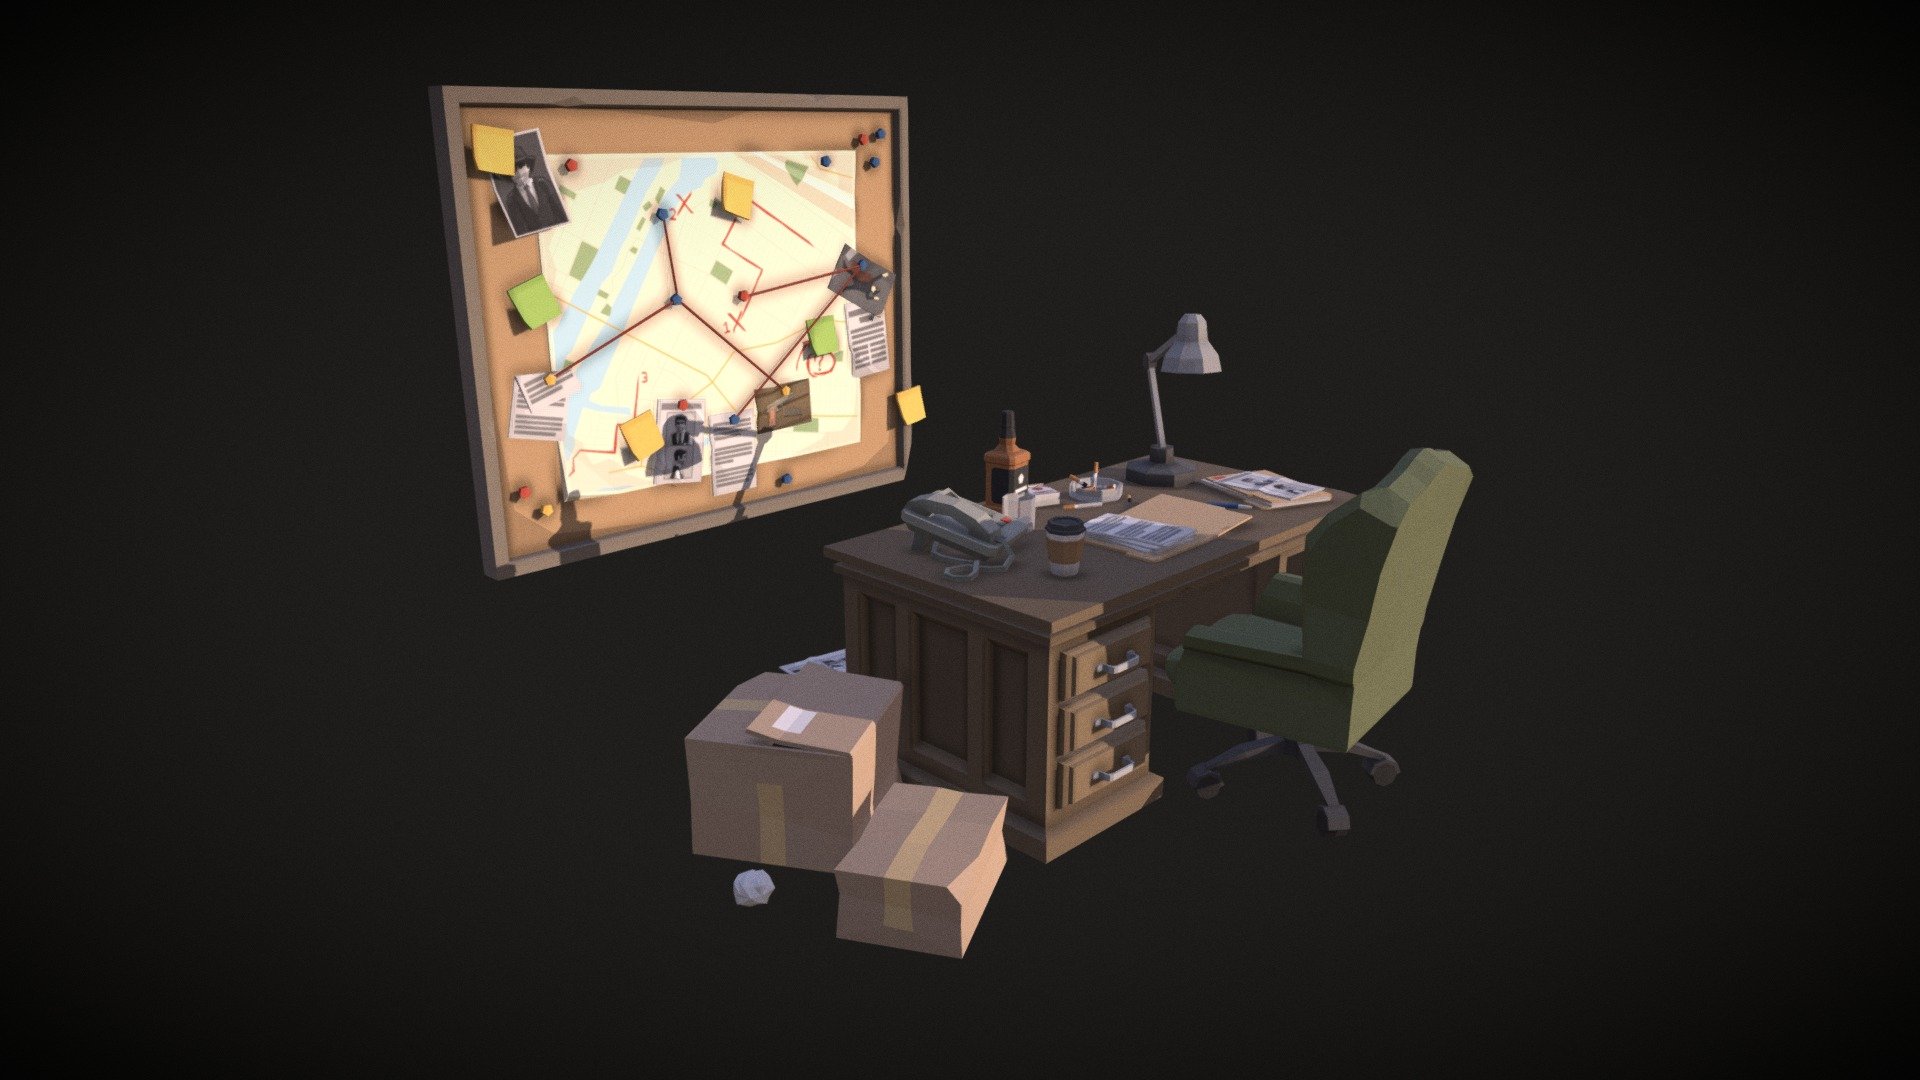 Hello World!

Introducing the Detective Office LowPoly Pack

The set includes: 
* Alcohol bottle
* Alcohol glass
* Armchair
* Box
* 3 Cardboard boxes
* 2 Cigarettes
* Cigarette lit
* Cigarette pack
* Cigarette tray
* Cup coffee
* Desk
* Desk lamp
* 3 Folders 
* 3 Papers
* Paper crumpled
* Paper pile
* Pen
* Phone
* Pinboard
* 
Models include 2 texture maps: Albedo,  Emissive

Doors, drawers - separate, child objects

Formats: FBX, BLEND - Detective Office LowPoly Pack - 3D model by Tarasov3D 3d model